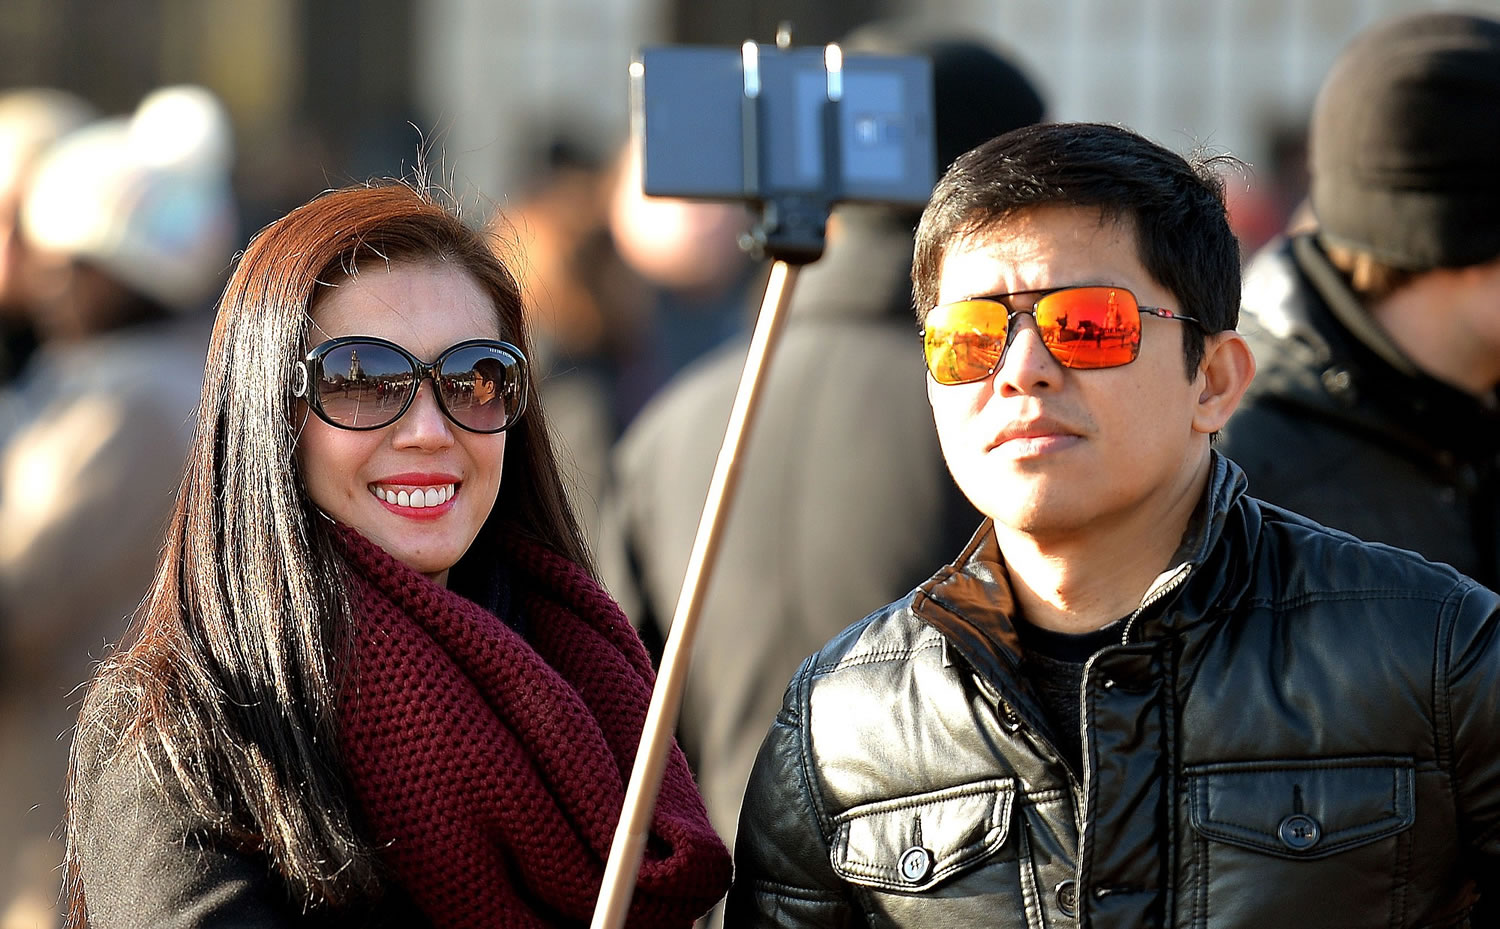 Tourists use a 'selfie stick' in London.